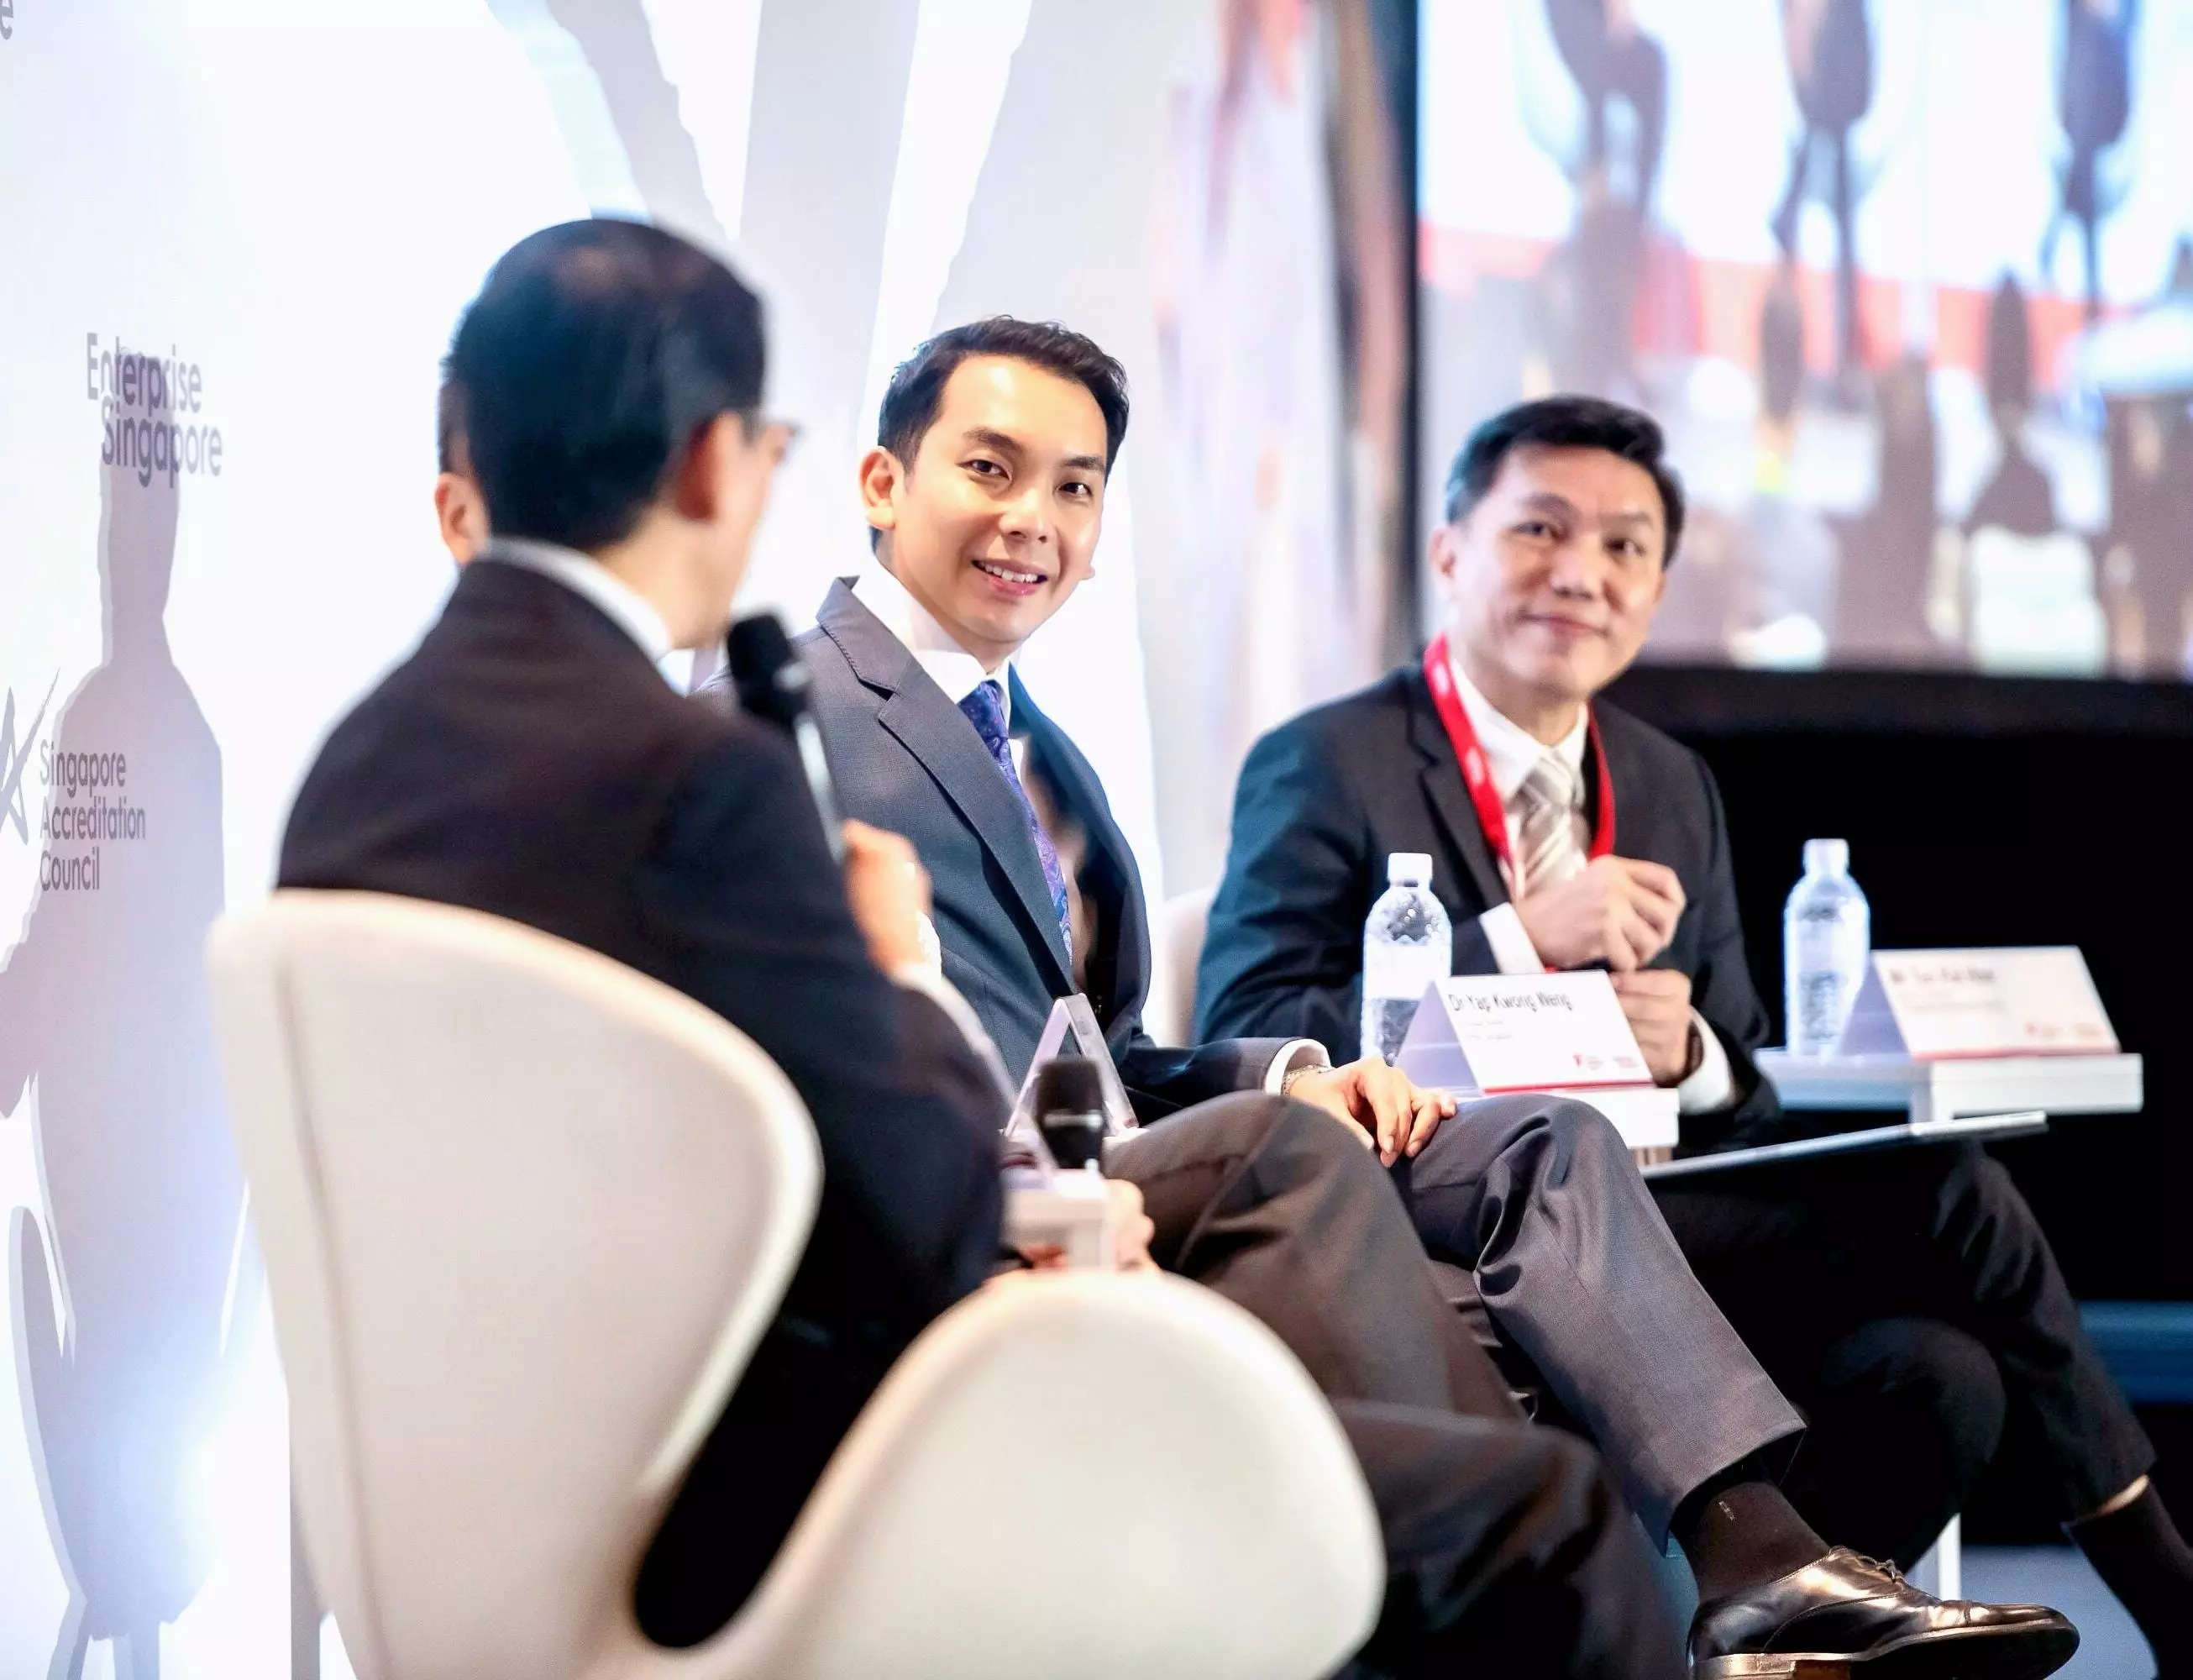 Yap (center) participating in a panel discussion organized by Enterprise Singapore, a government agency that supports enterprise development.